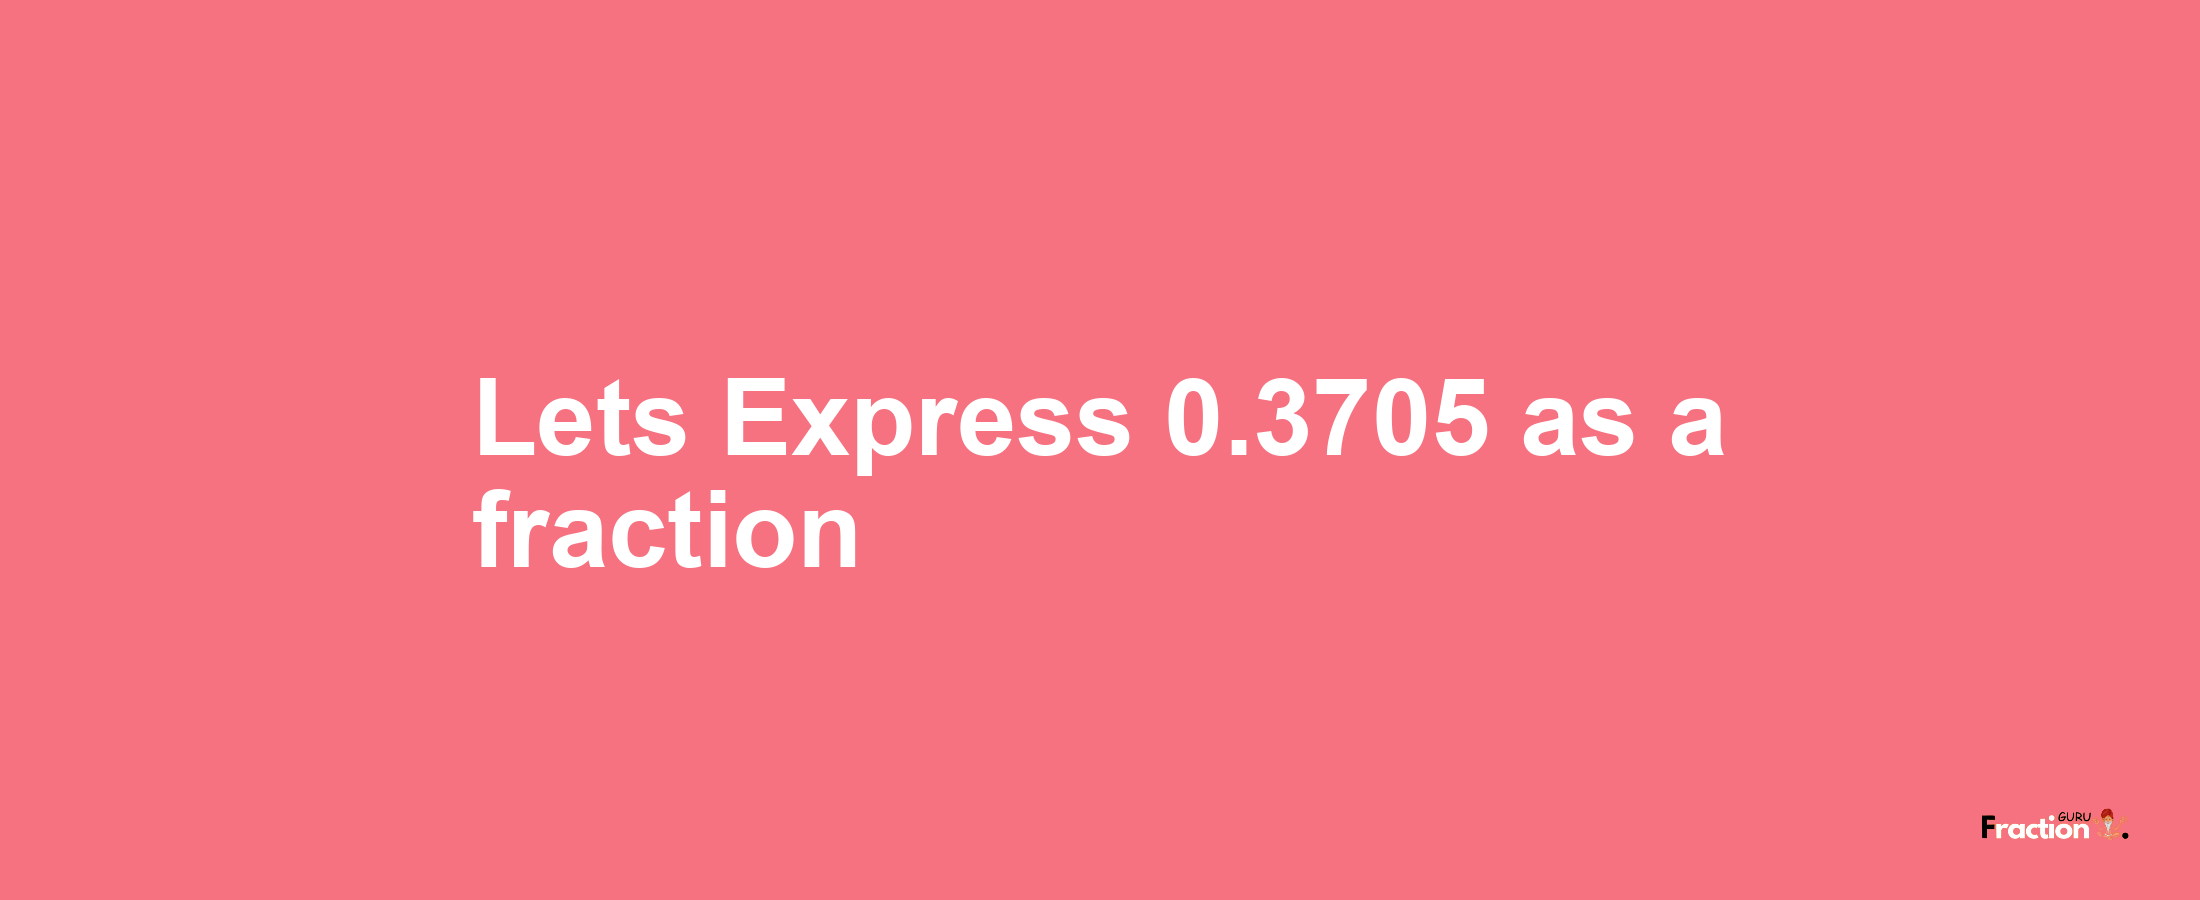 Lets Express 0.3705 as afraction